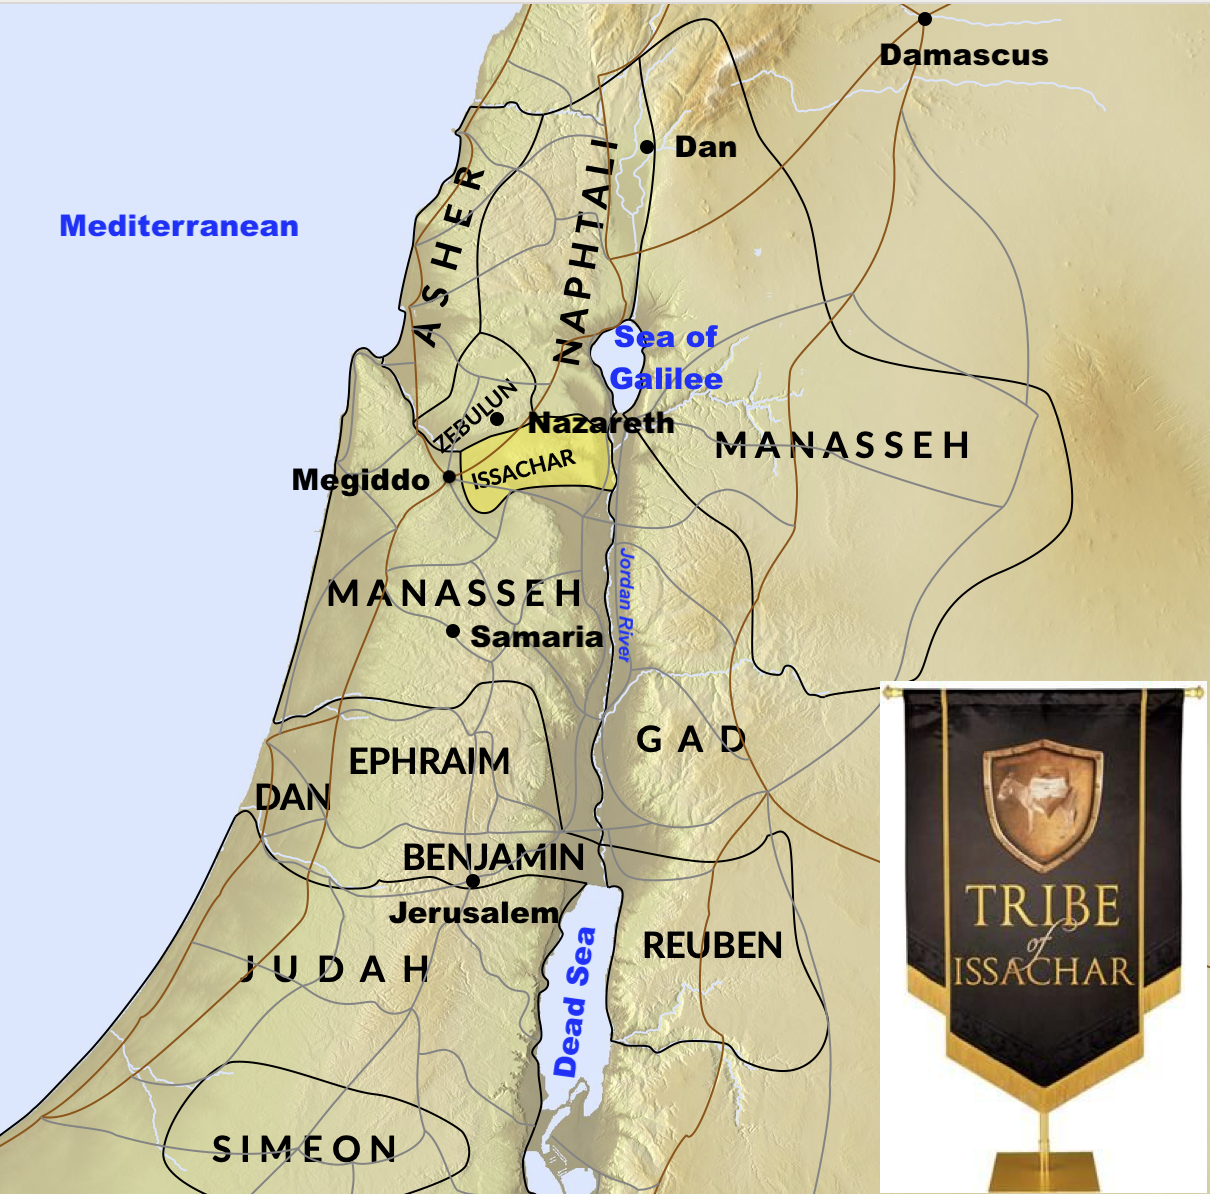 A map of the boundary for the Tribe of Issachar.